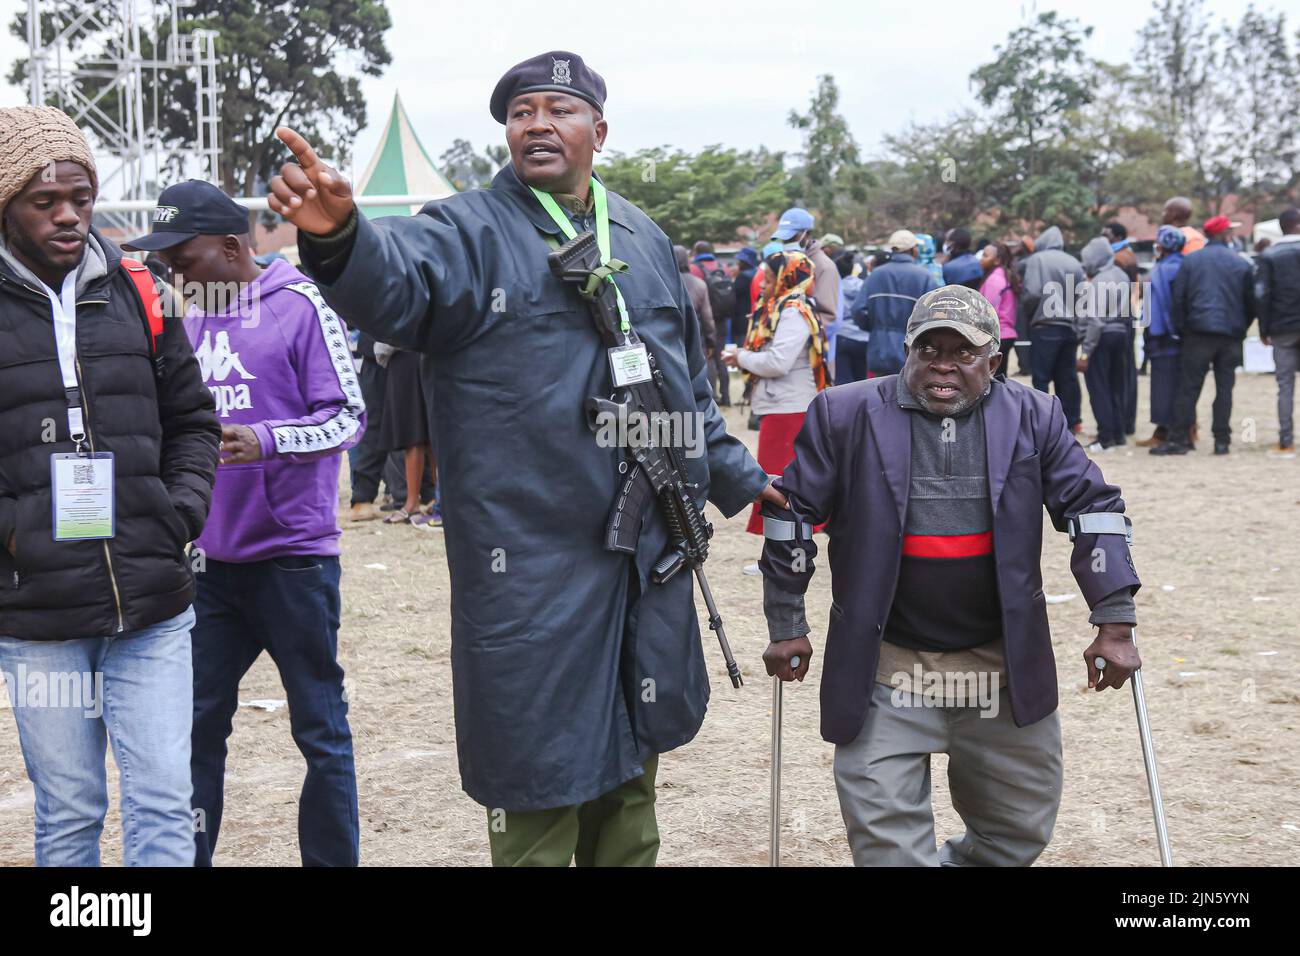 A Kenyan police officer helps a physically challenged Kenya man to locate his polling line, Kenya's general elections on 9th August 2022, at St. Teresa's Primary and Secondary school in Nairobi. Kenyan voters head to the polls. They will elect the president and deputy president, county governors and running mates, members of the Senate, representatives of the National Assembly (including women county representatives) and members of County Assemblies. This year, voting will be held across an estimated 46,232 polling stations. Stock Photo